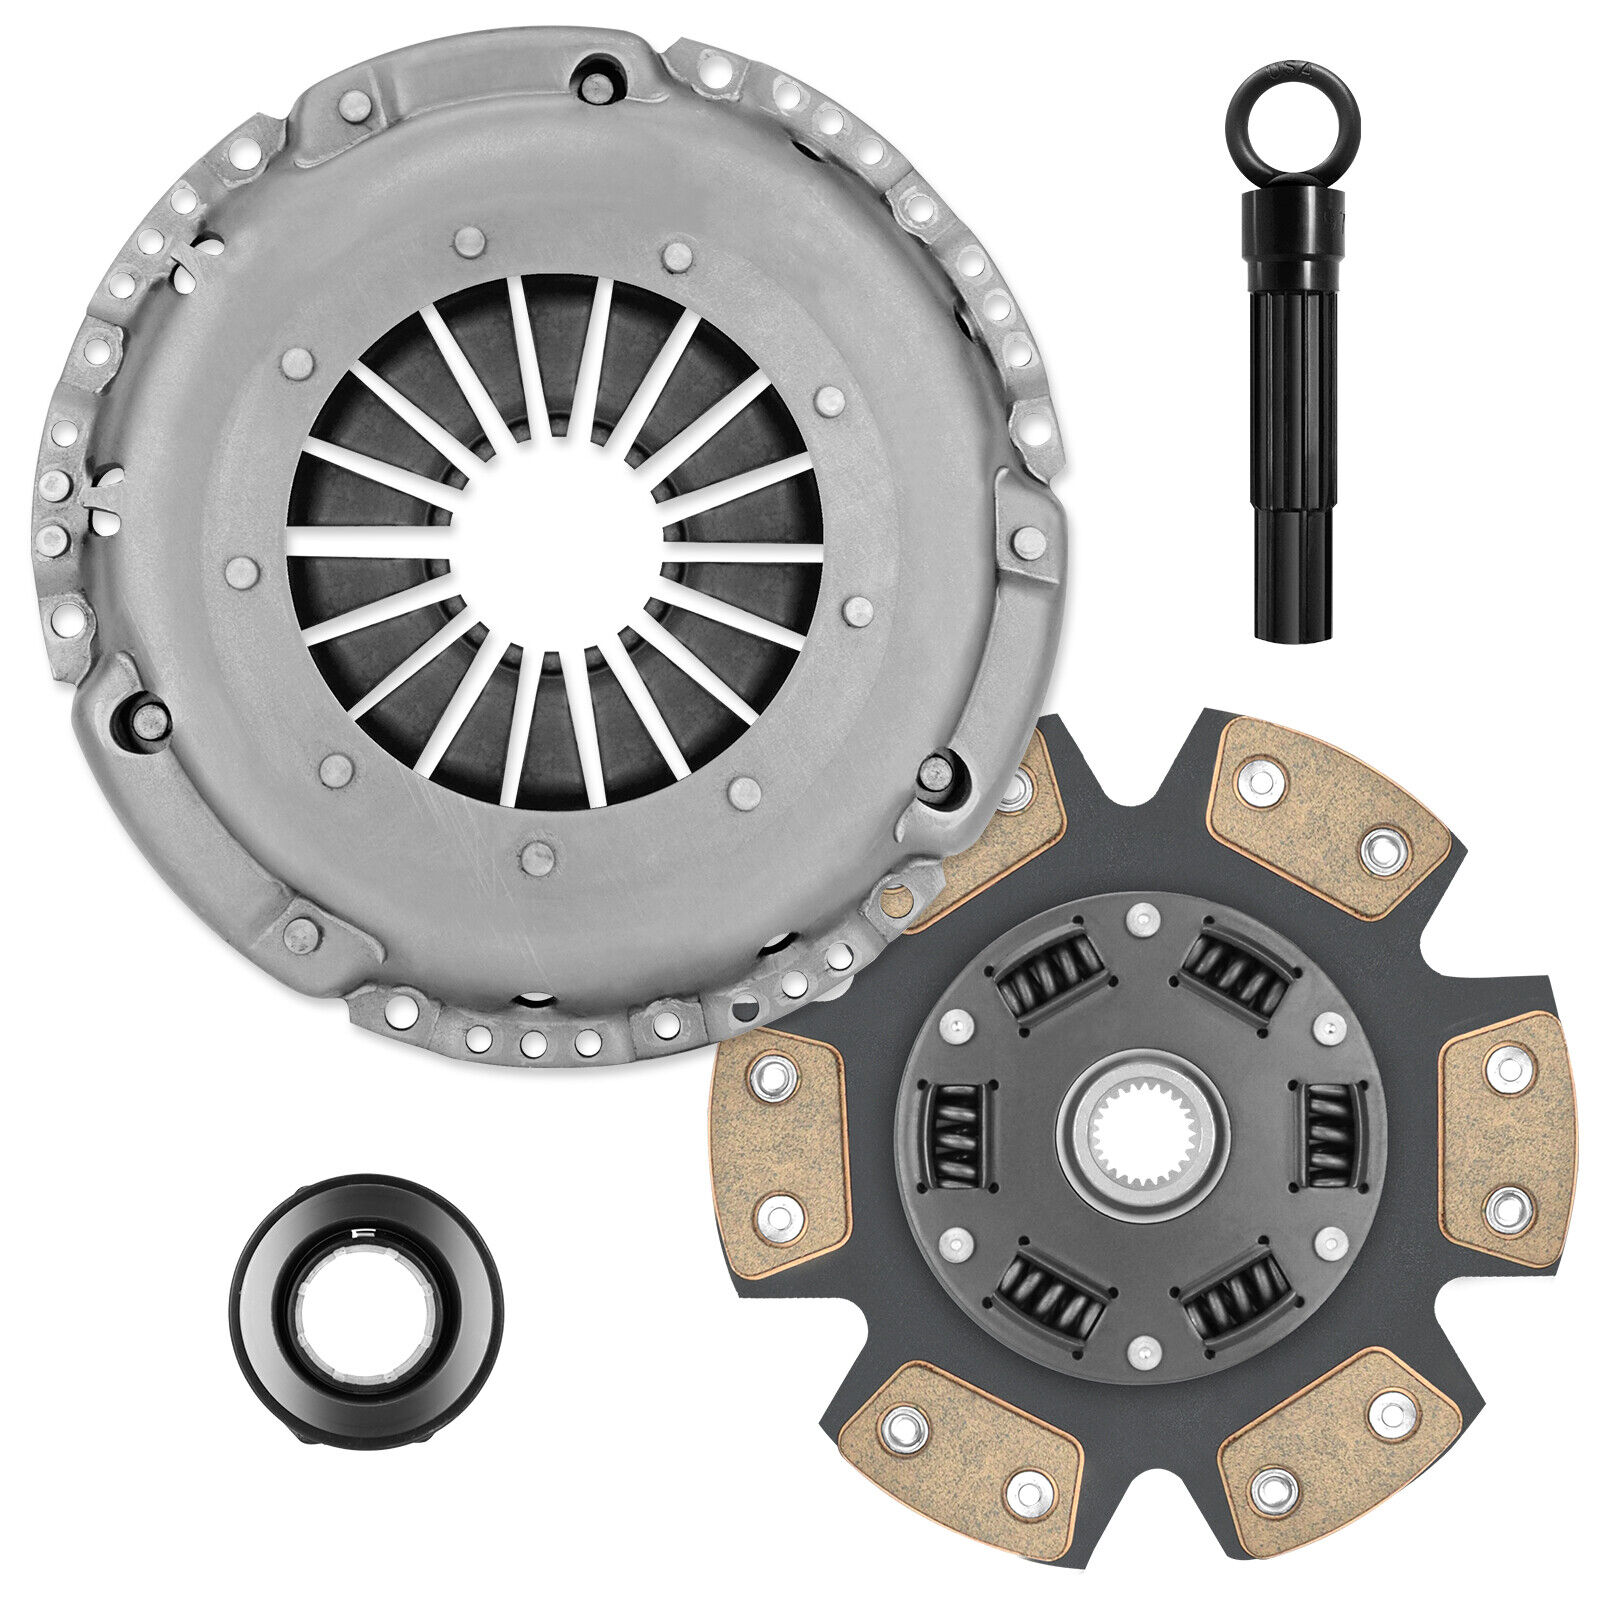 AT Clutches Stage 3 Clutch kit for Volkswagen Corrado 92-95 V6 